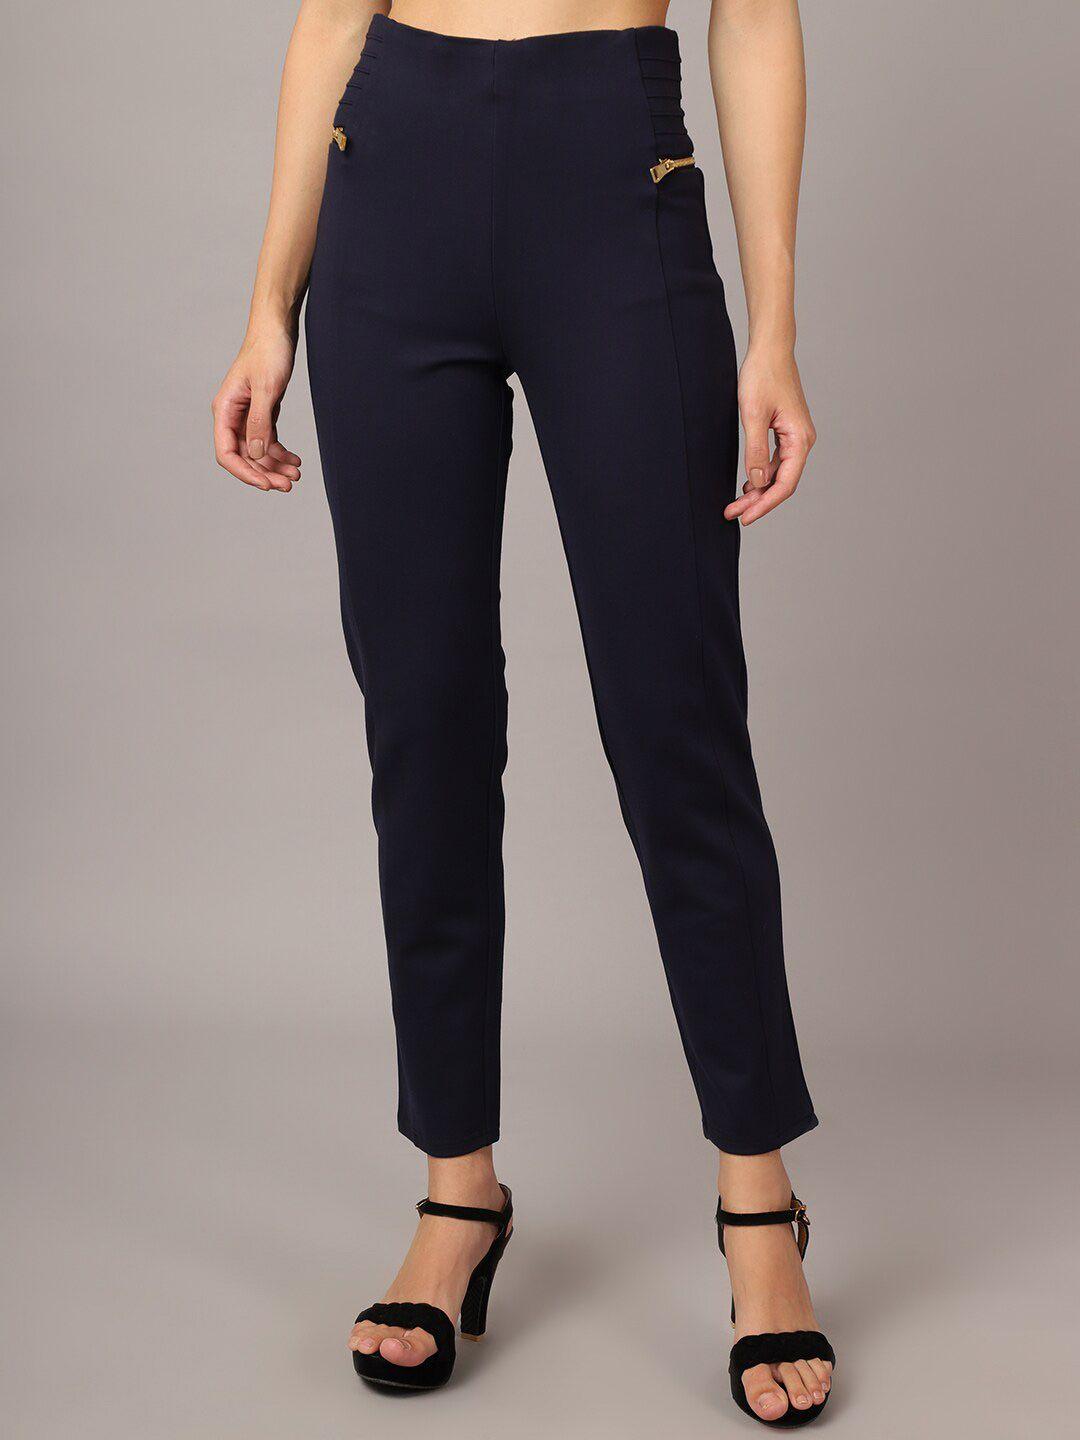 cantabil-women-navy-blue-solid-cotton-jeggings